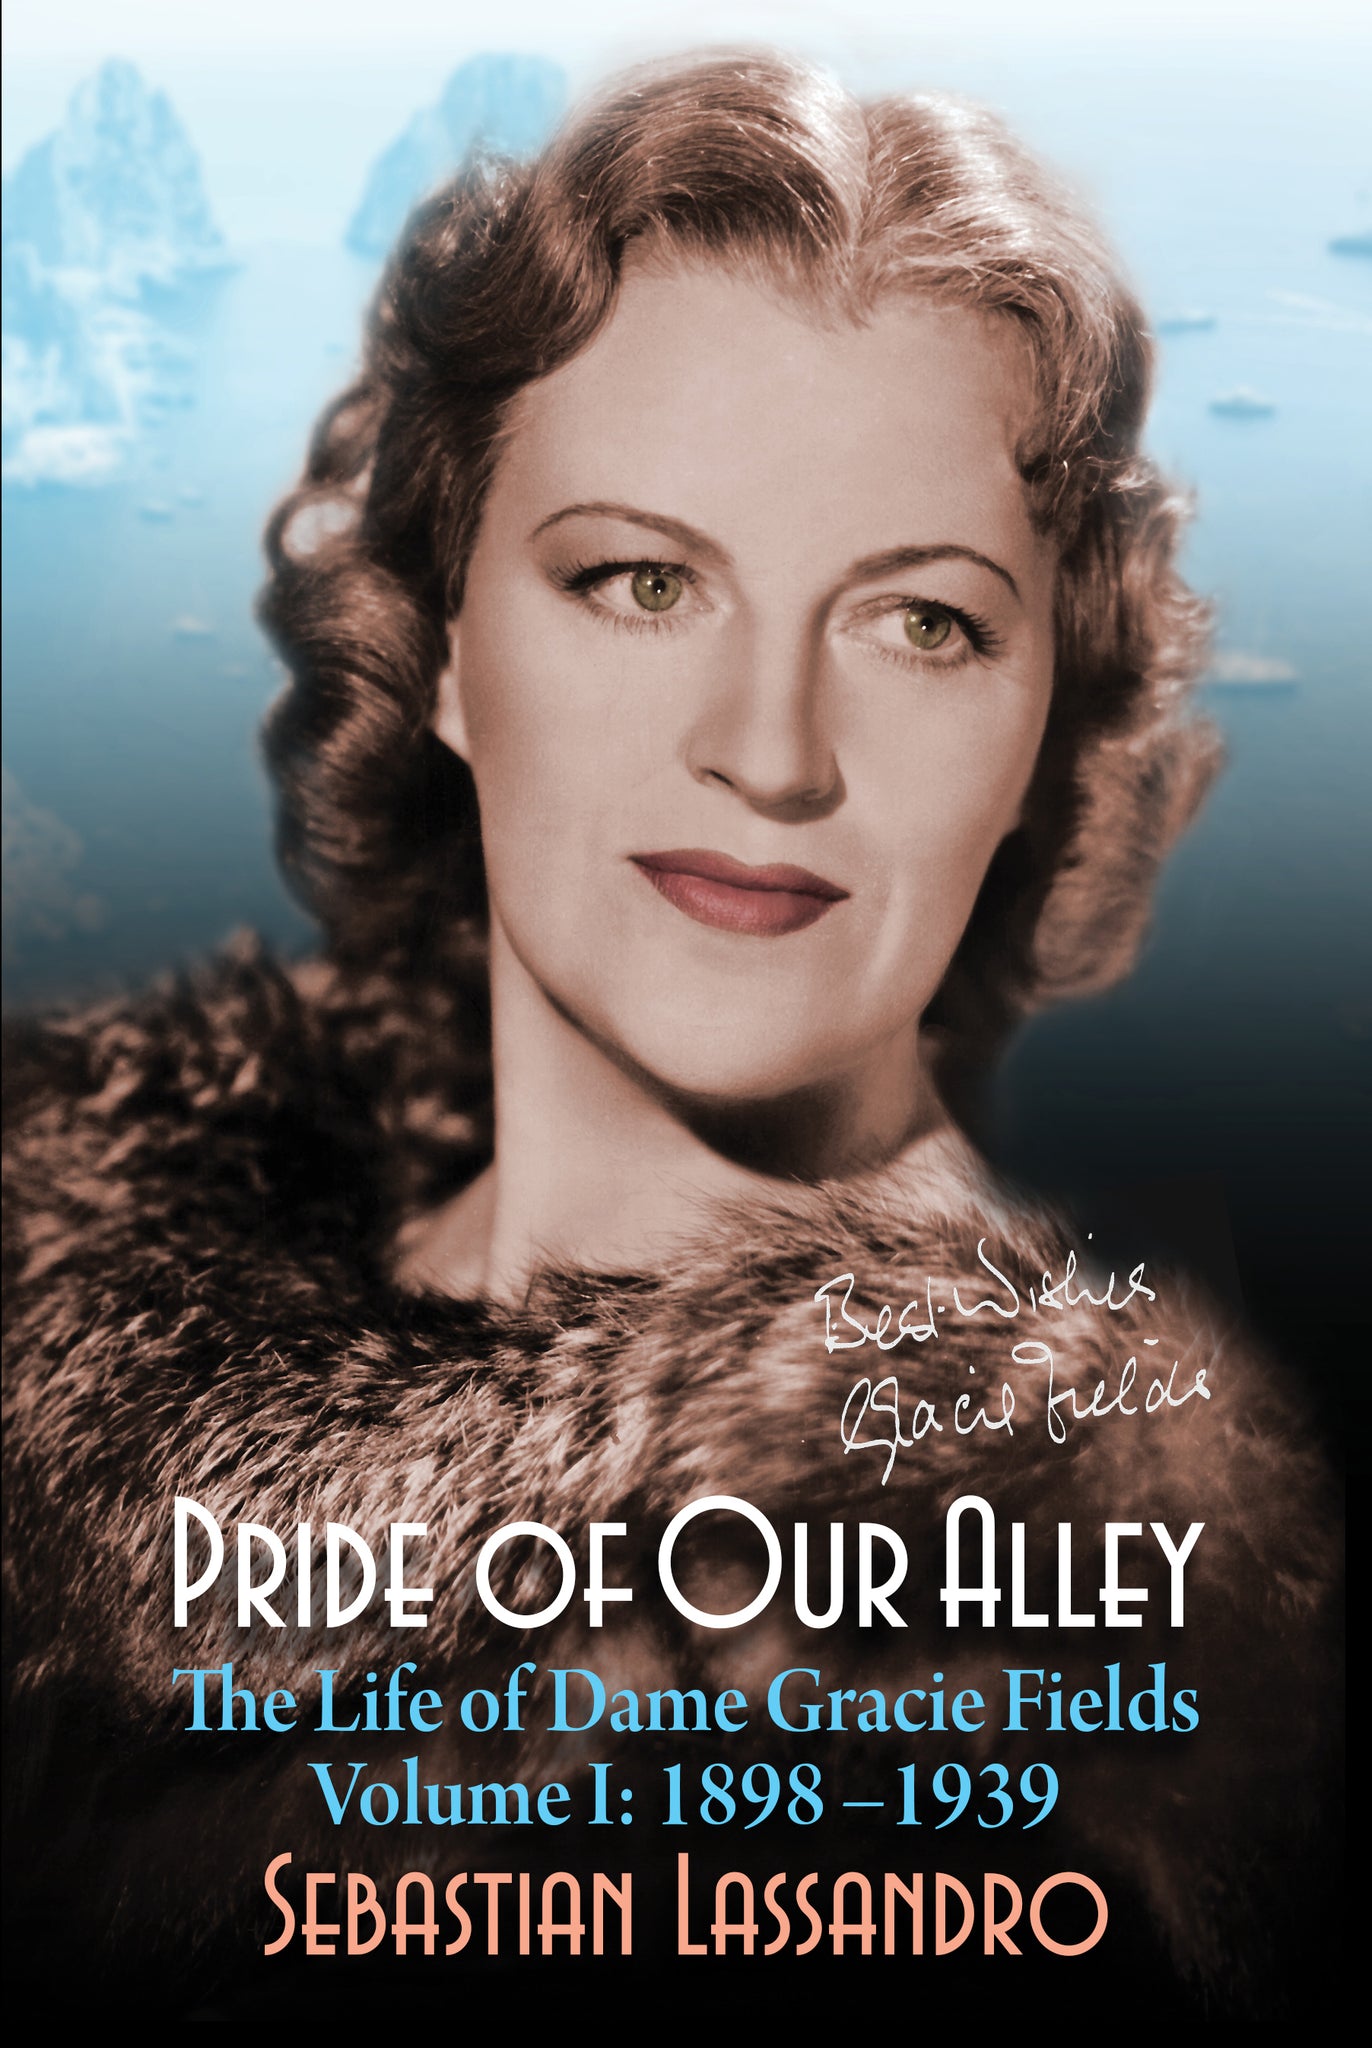 Pride of Our Alley: The Life of Dame Gracie Fields Volume I -1898-1939 (ebook) - BearManor Manor